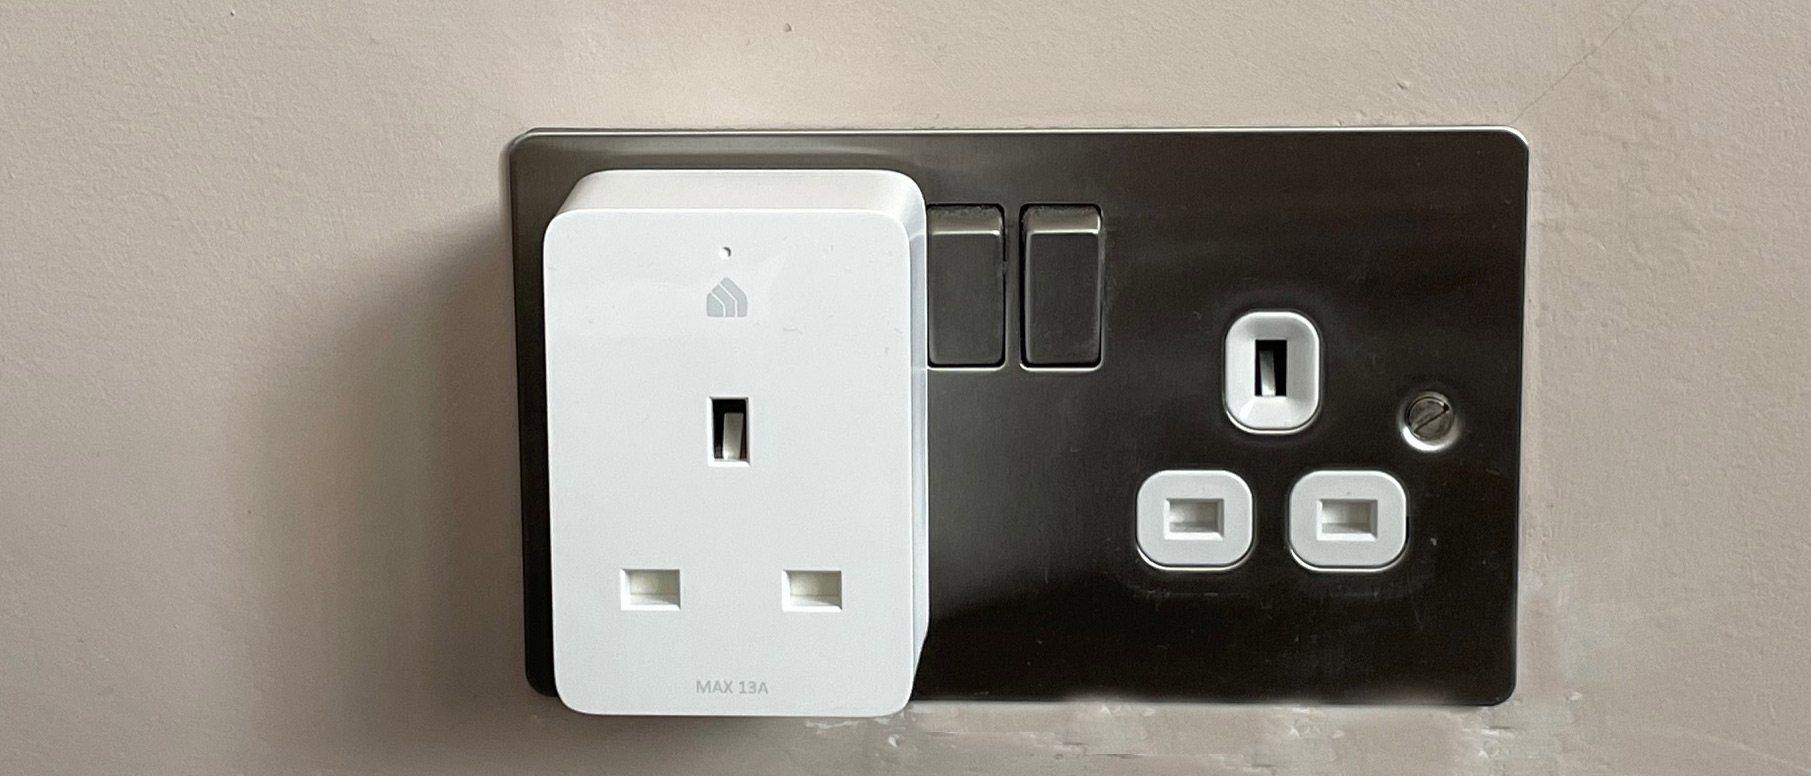 Use your Alexa to order a Kasa Smart Plug Mini and receive a KP115